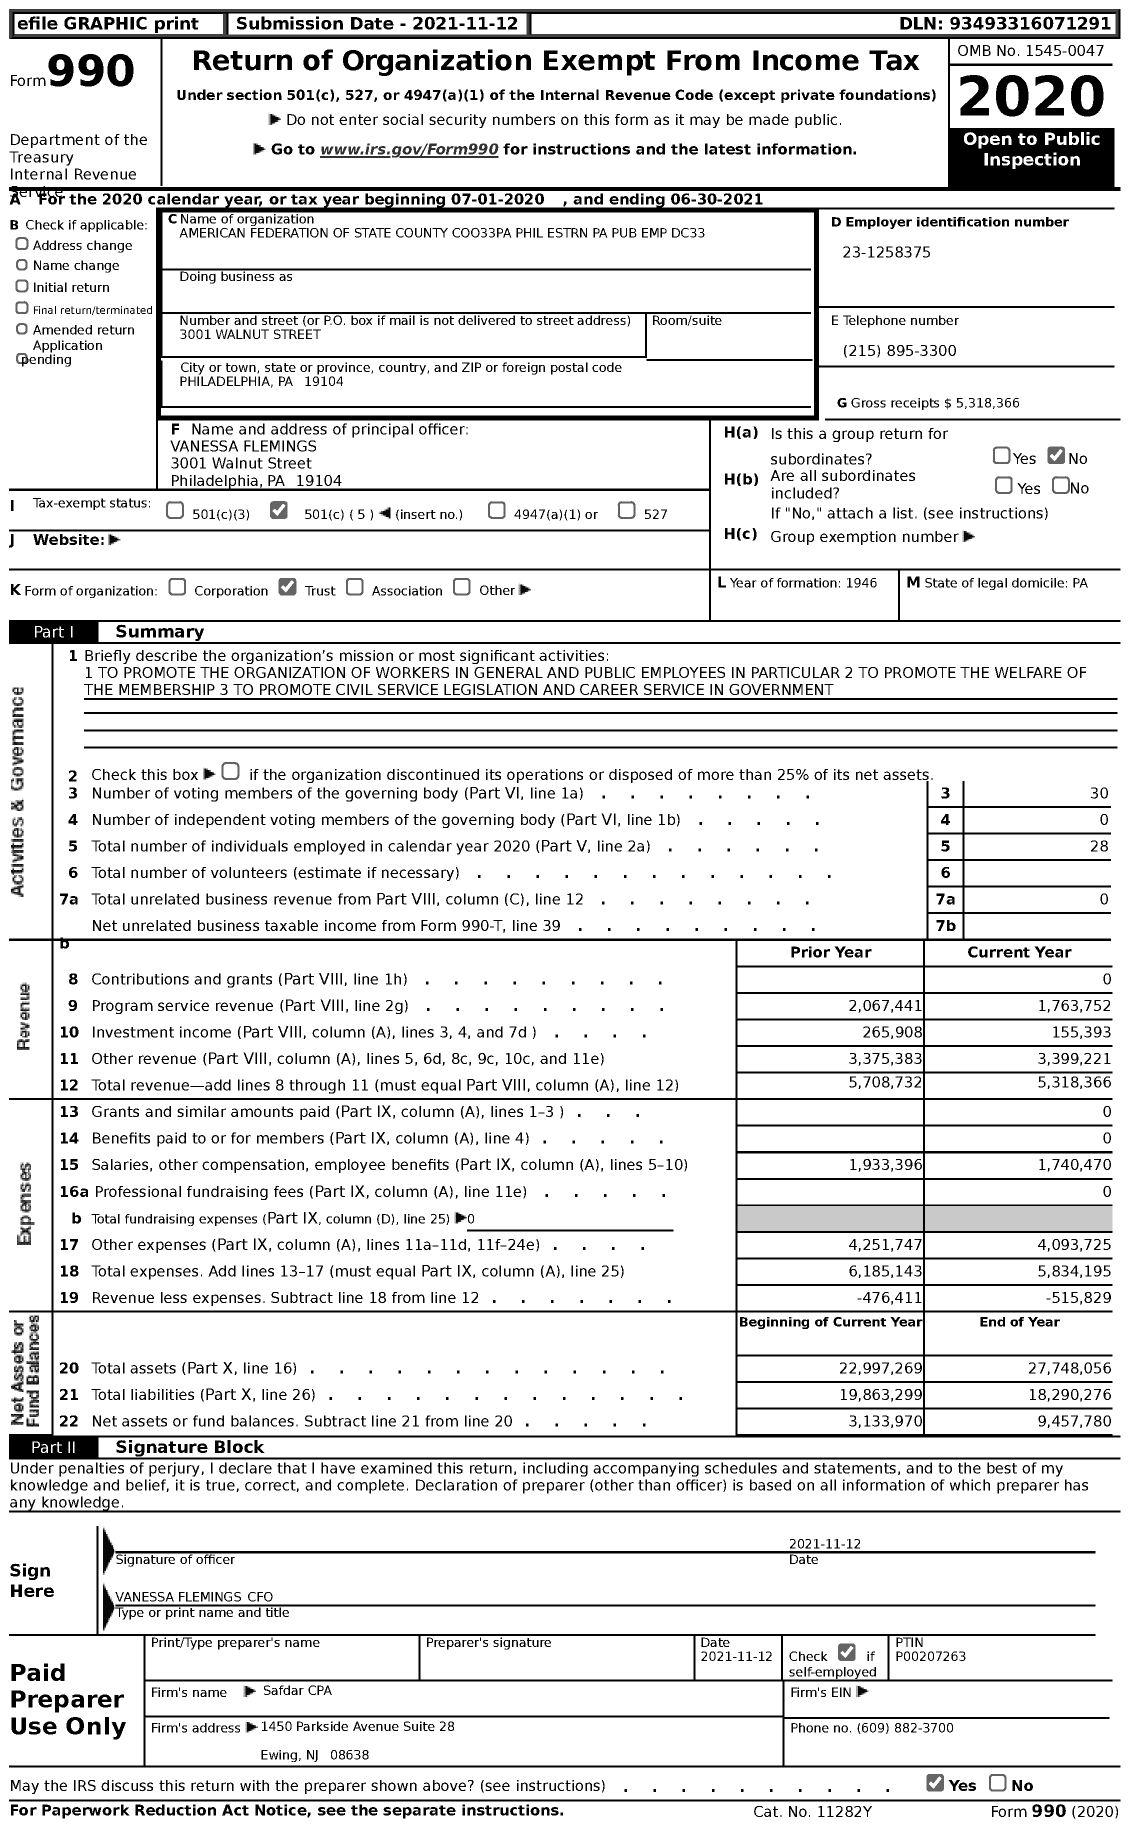 Image of first page of 2020 Form 990 for American Federation of State County & Municipal Employees - C0033pa Phil Estrn Pa Pub Emp DC 33